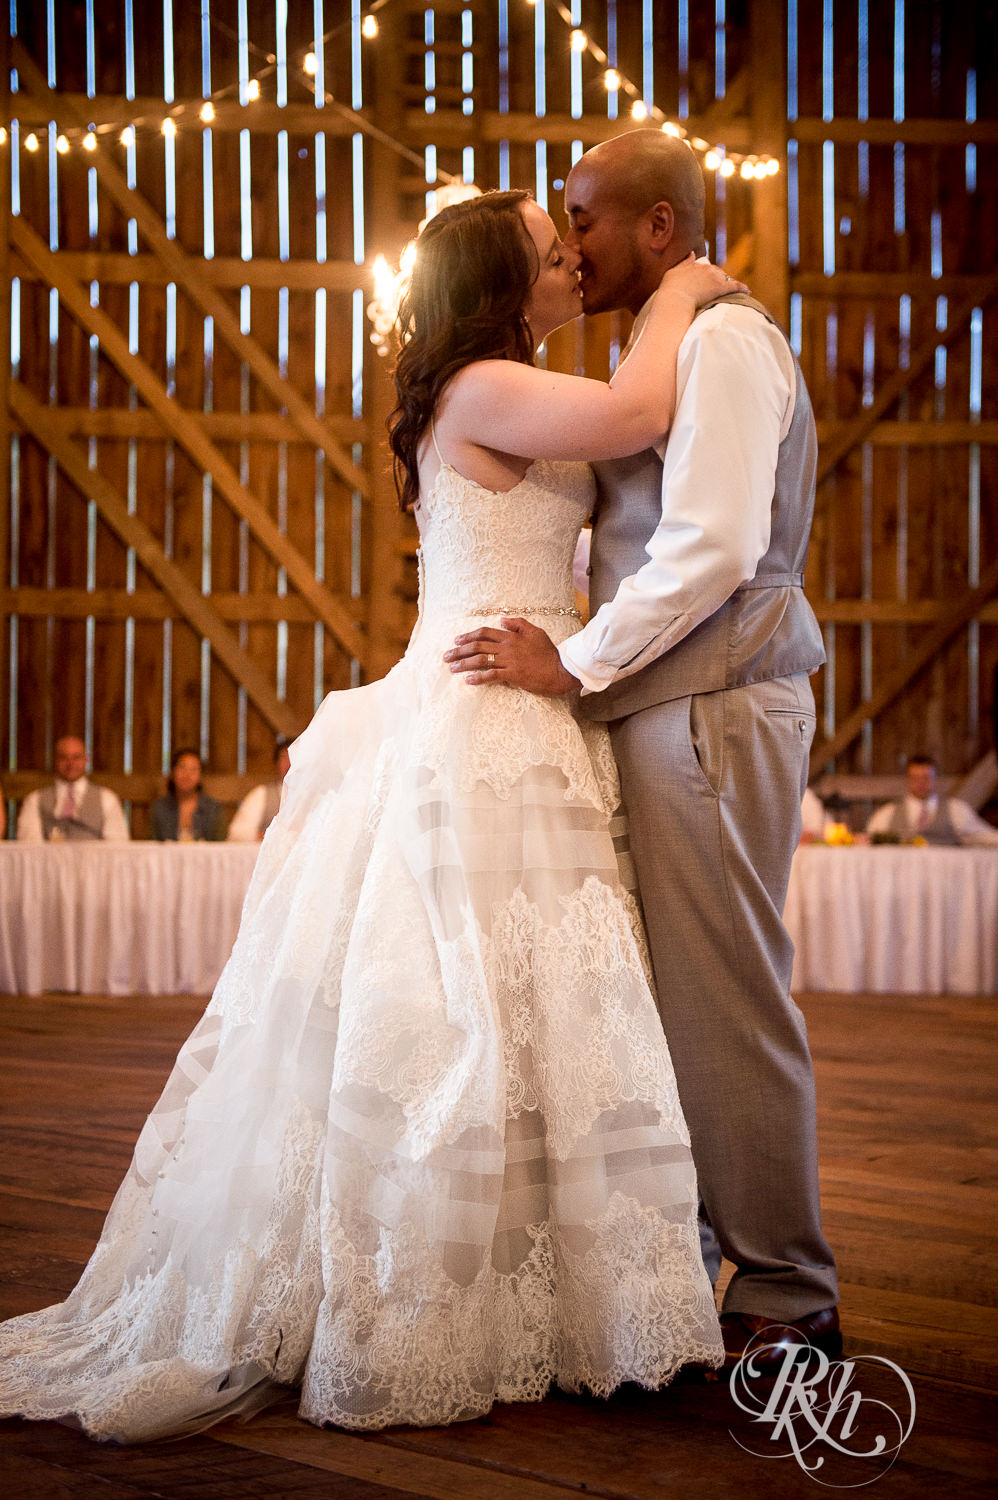 Bride and Asian groom kiss under a chandelier during wedding reception at Birch Hill Barn in Glenwood City, Wisconsin.